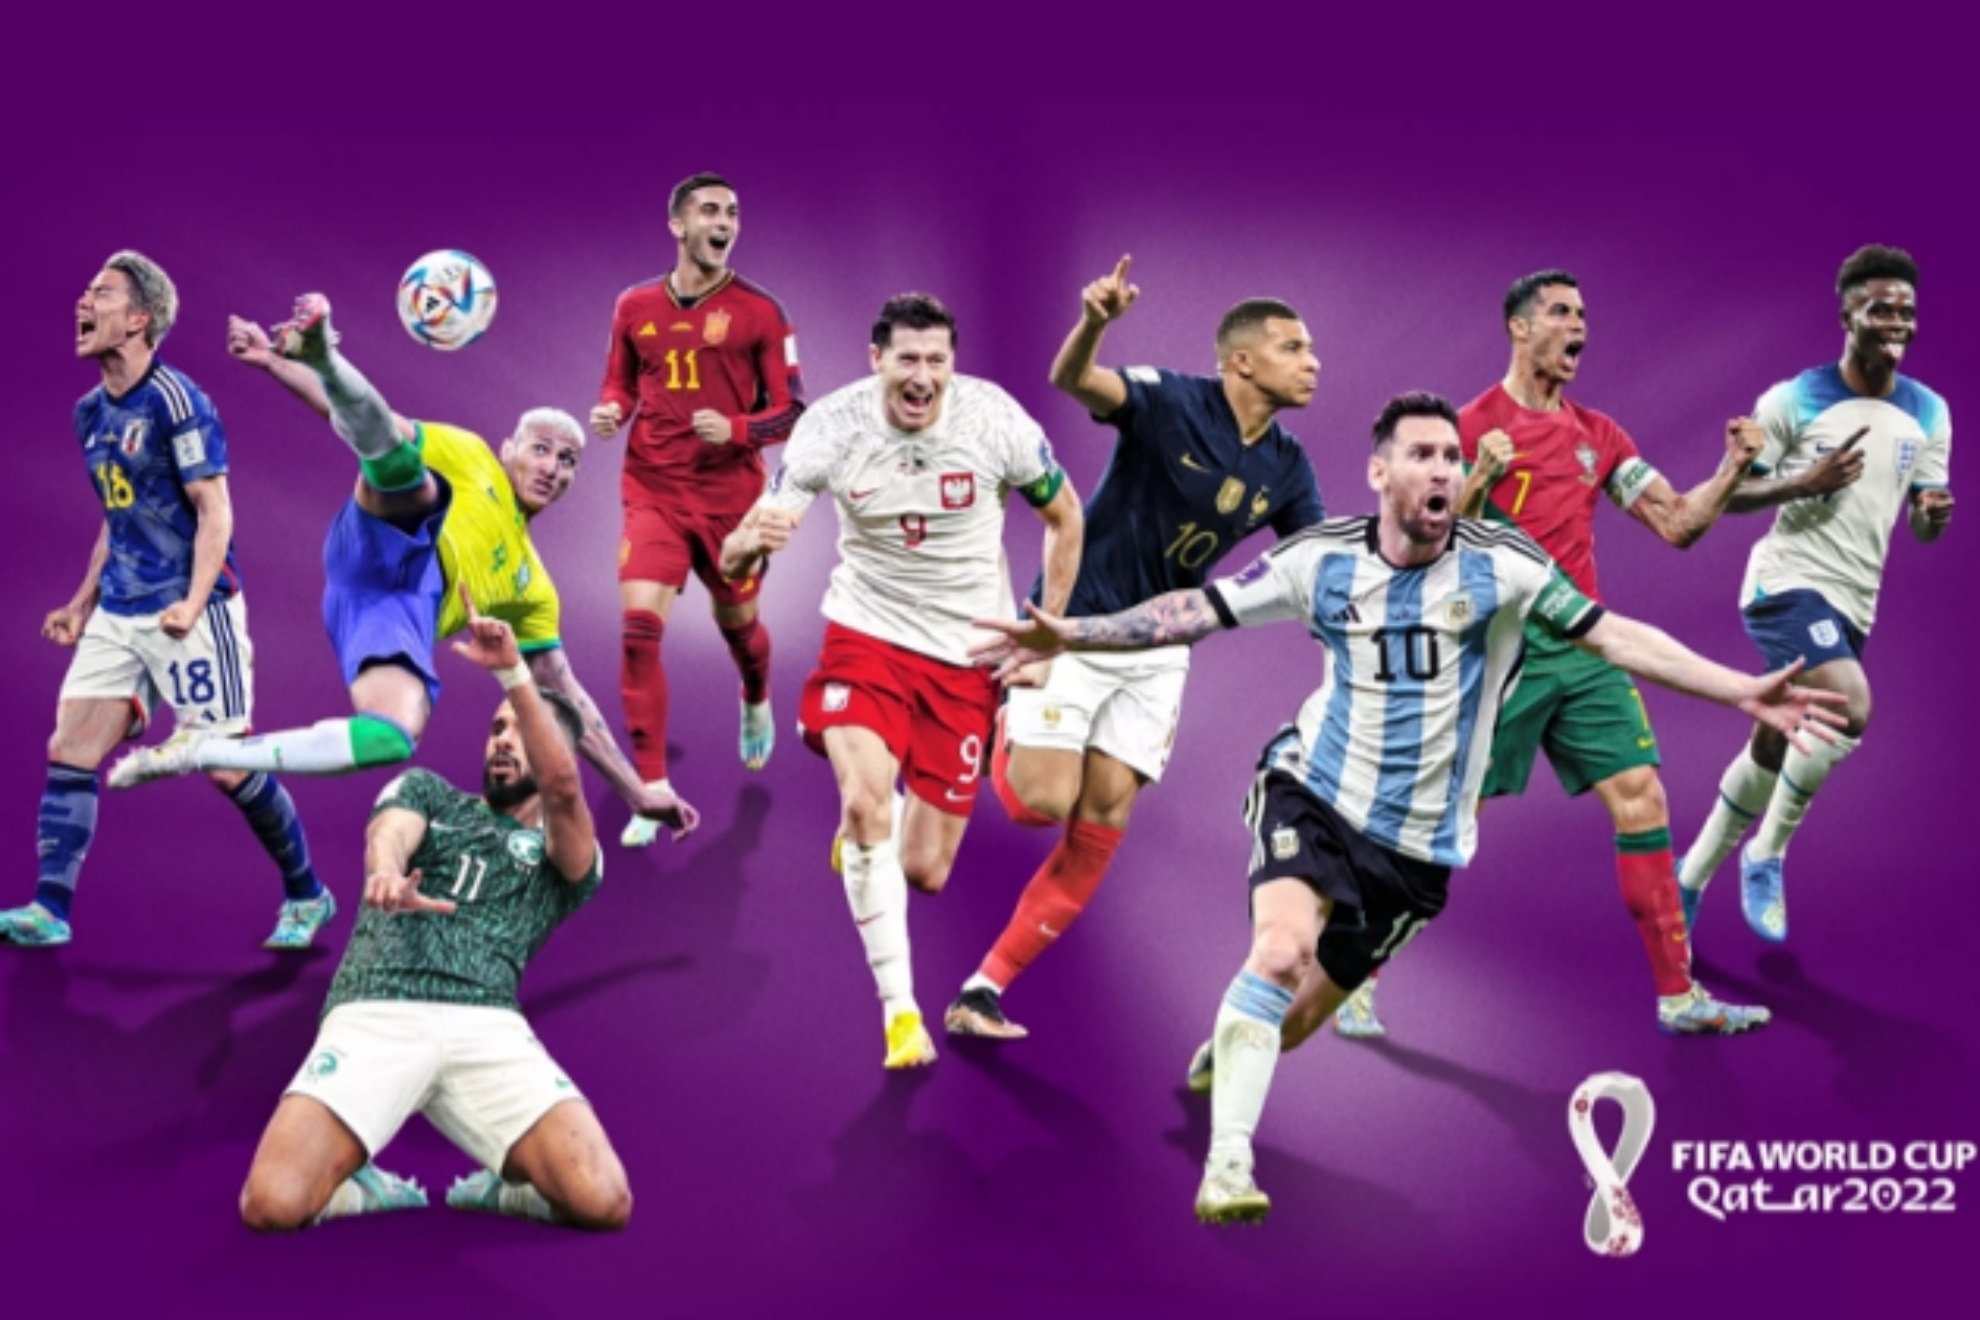 World Cup 2022: FIFA World Cup Qatar 2022: Who were the teams that qualified for the next round and when are they playing? | Marca